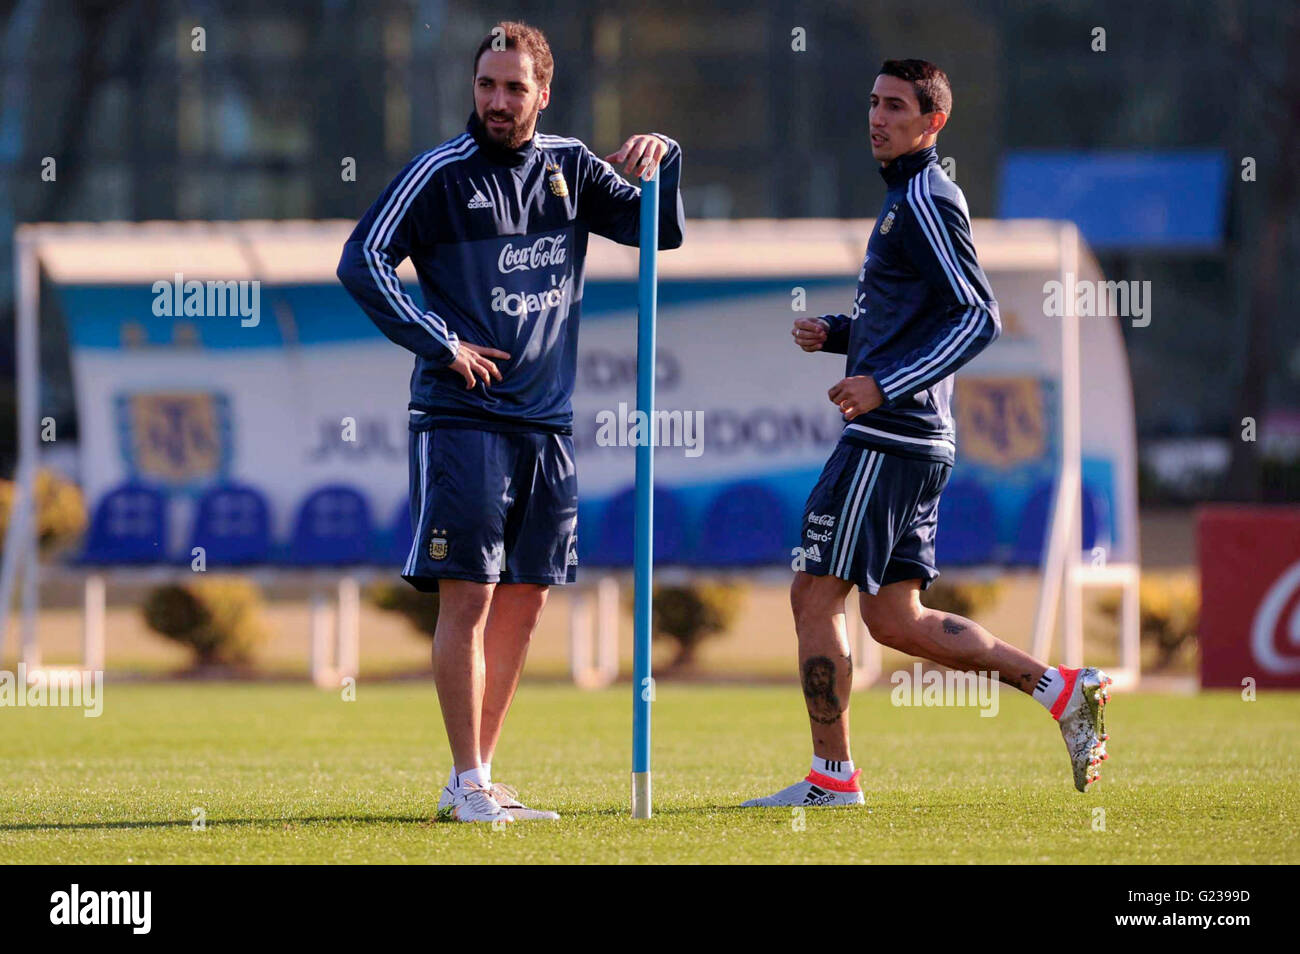 Buenos Aires, Argentina. 23rd May, 2016. Players Gonzalo Higuain (L) and Angel Di Maria (R), of Argentina's national soccer team, take part in a training session in the Julio Grondona grounds, in Buenos Aires, capital of Argentina, on May 23, 2016. Argentina will face Honduras in a friendly match on May 27. Credit:  Julian Alvarez/TELAM/Xinhua/Alamy Live News Stock Photo